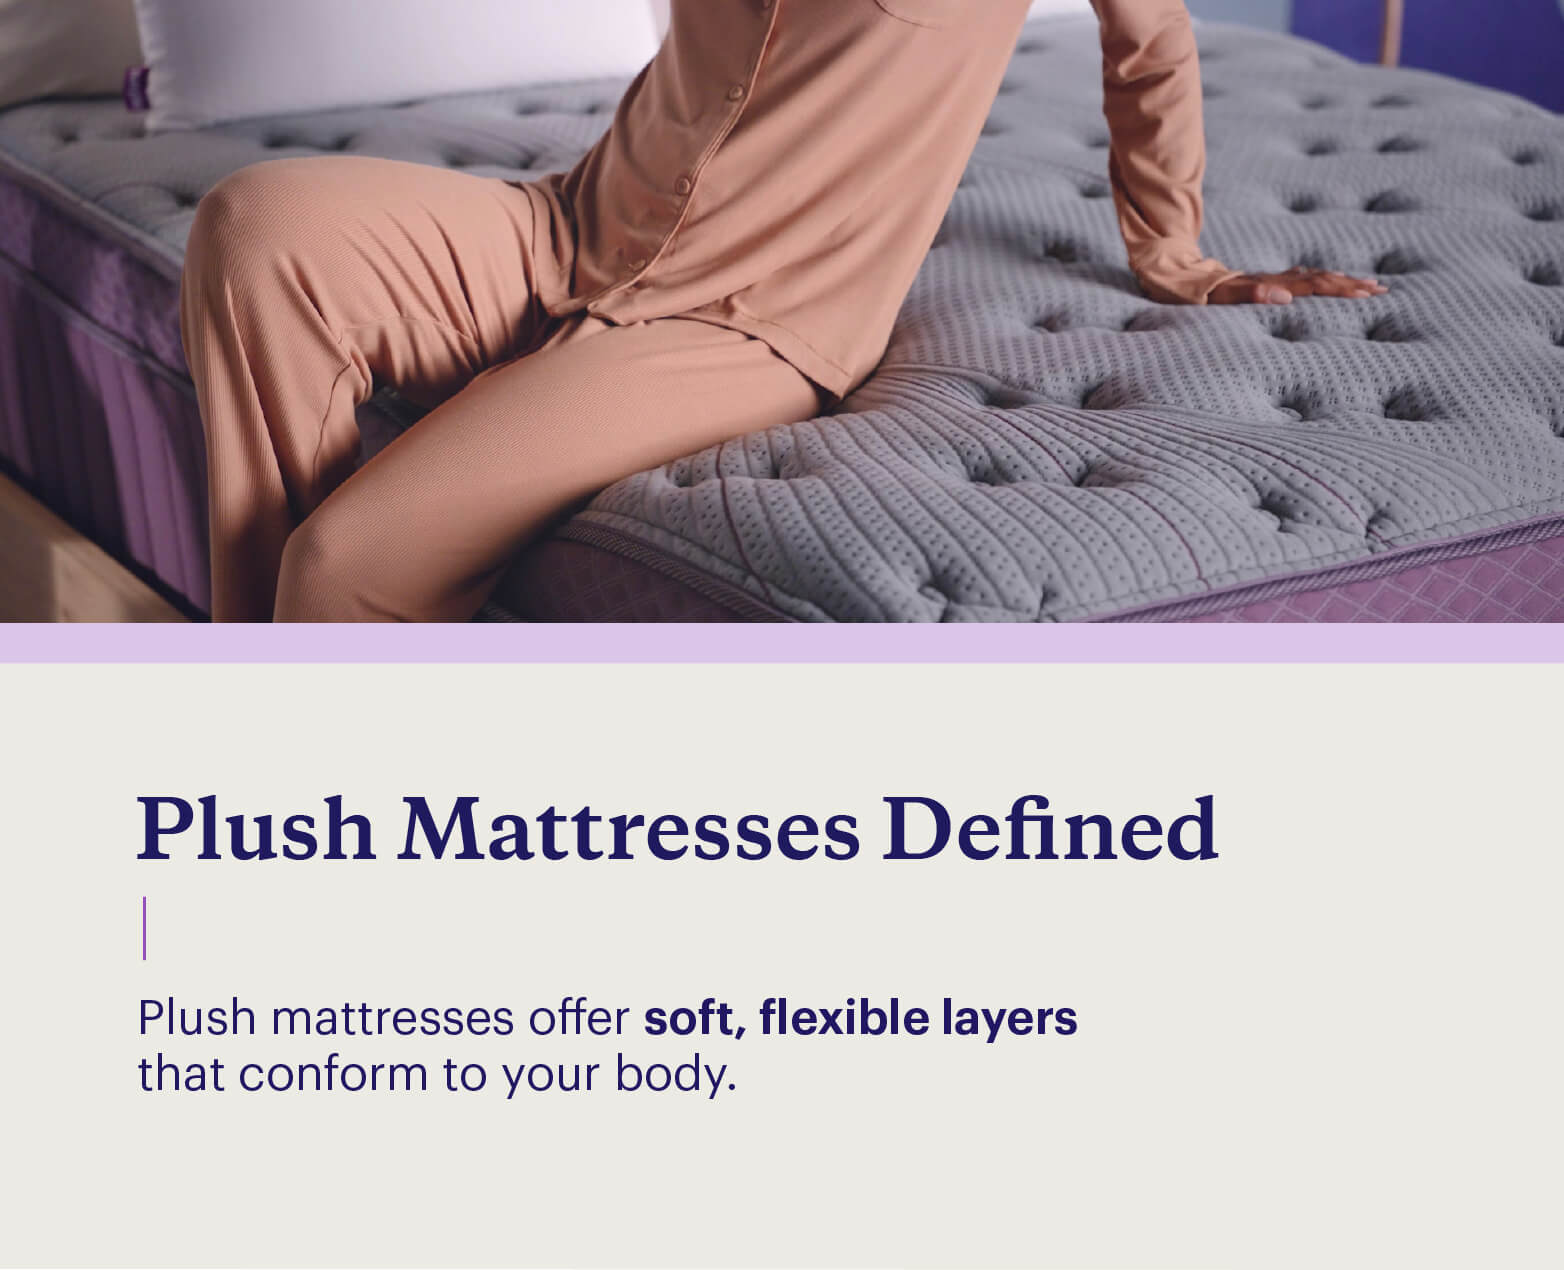 A graphic shows a woman sitting on a plush mattress and answers what is a plush mattress.